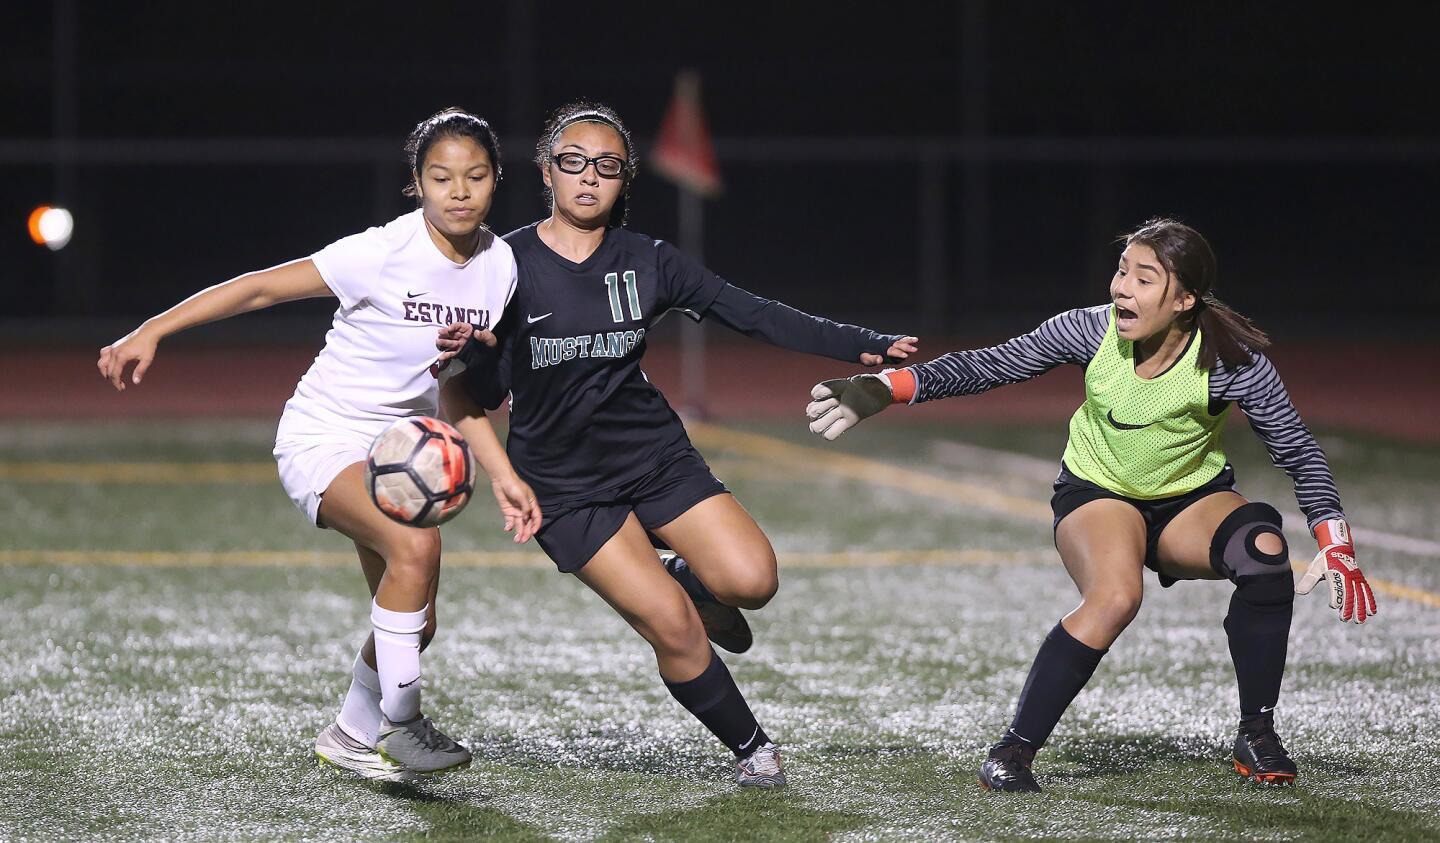 Lani Whittaker, center, tries to get a shot off for Costa Mesa High in front of Estancia goalkeeper Kimberly Martinez, right, as Daniela Garcia, left, tries to defend in an Orange Coast League match Tuesday.